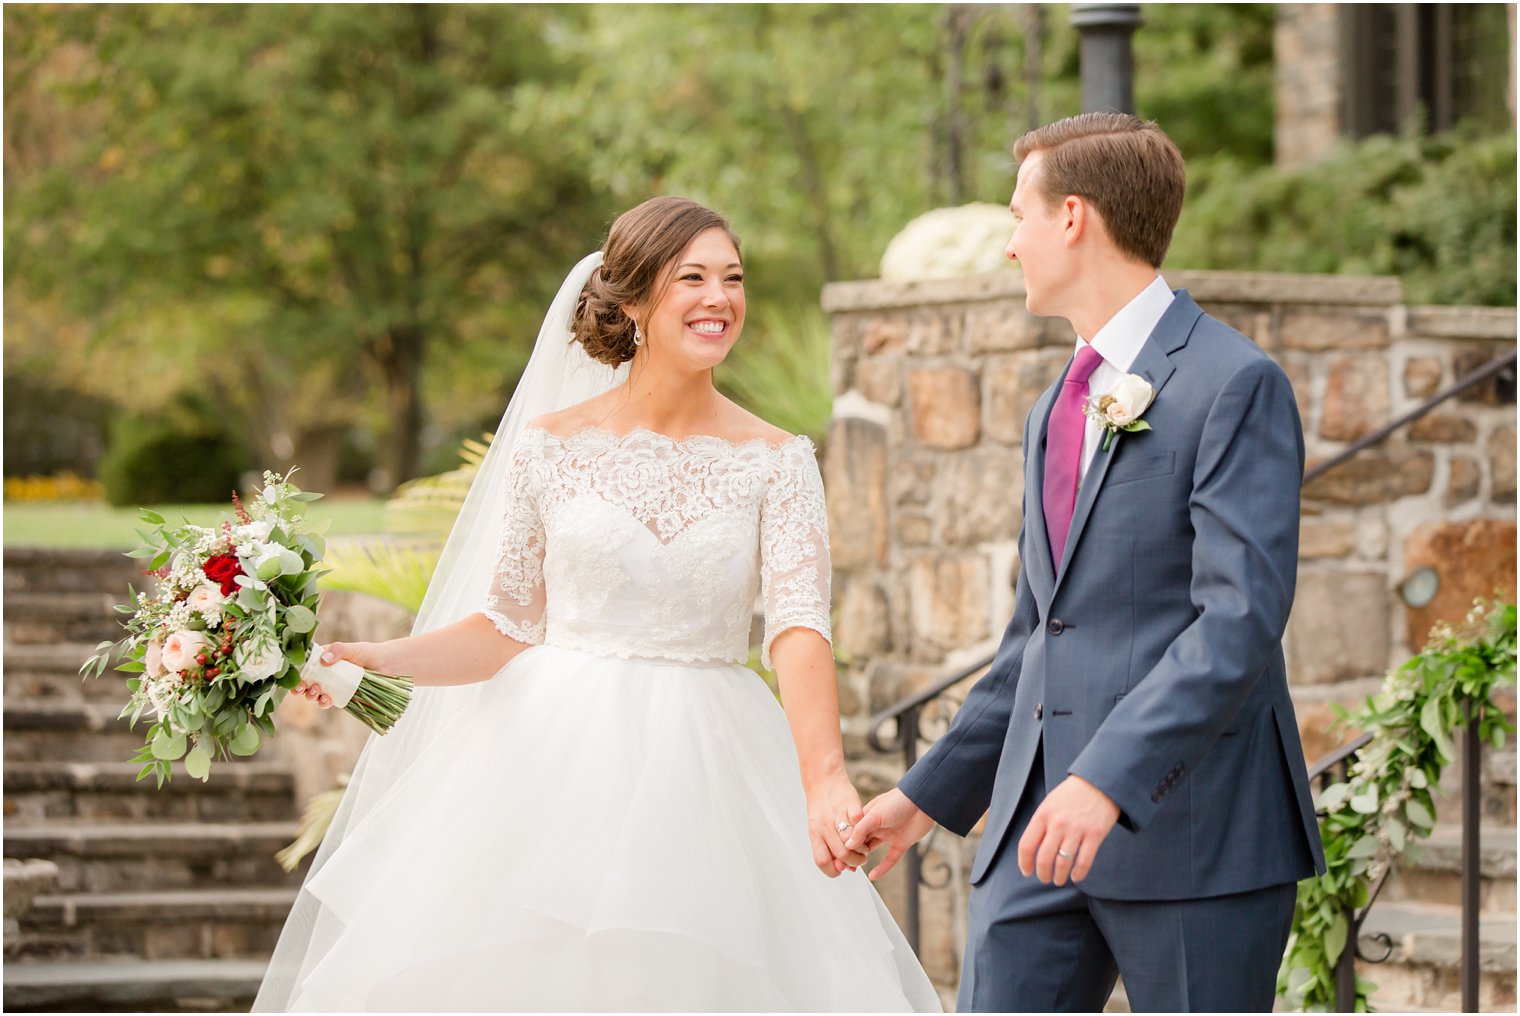 Bride and groom photos at Pleasantdale Chateau